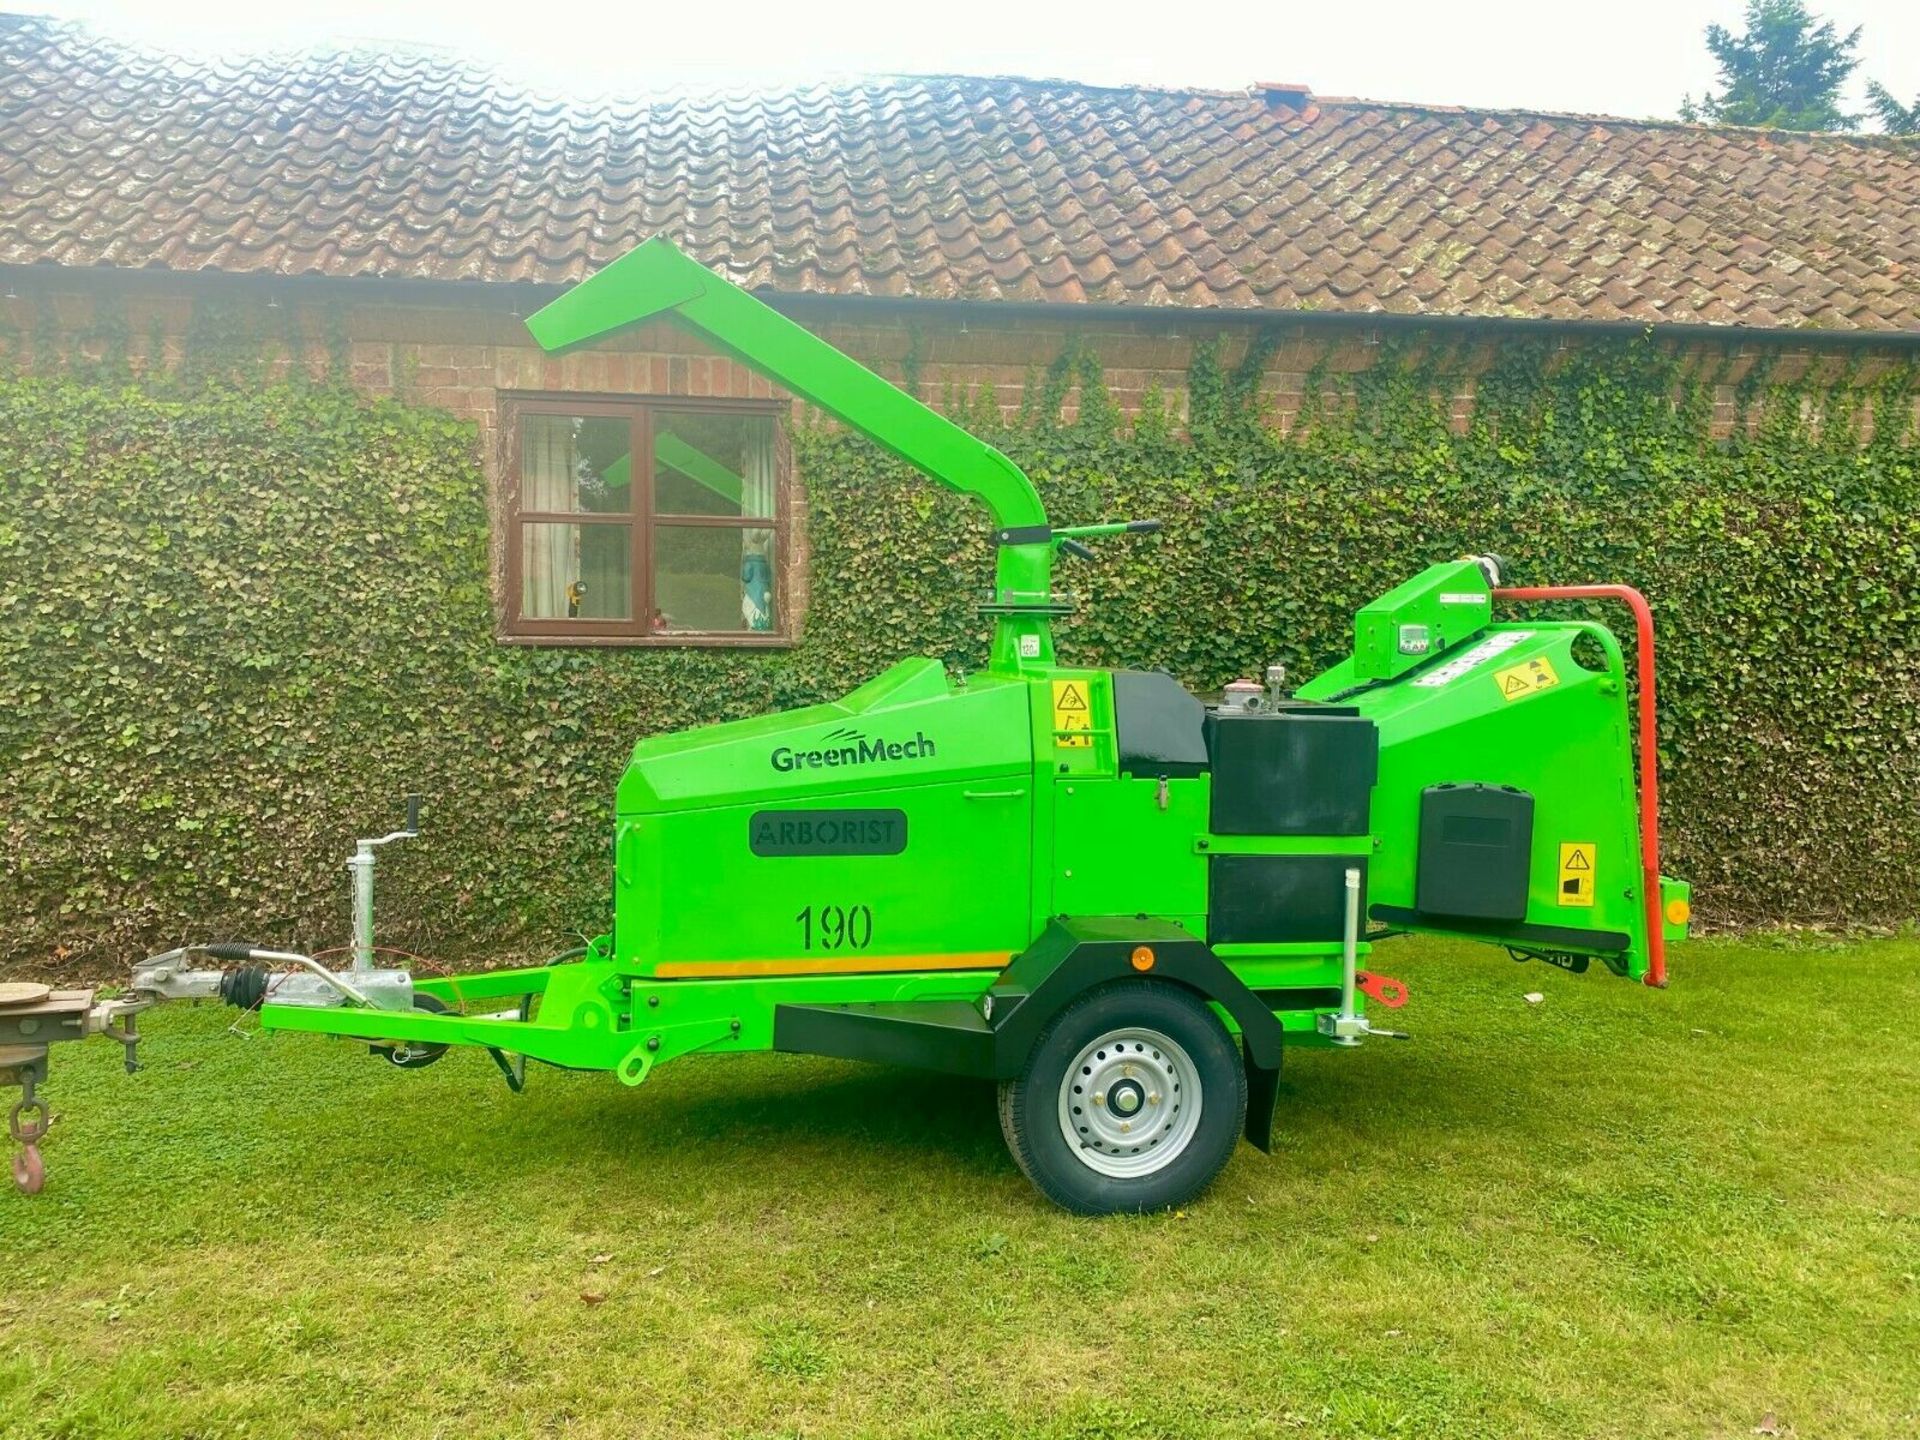 GREENMECH WOODCHIPPER, YEAR 2015, 190MM CHIPPING CAPACITY, ARBORIST 190, ONLY 275 HOURS *PLUS VAT* - Image 3 of 8